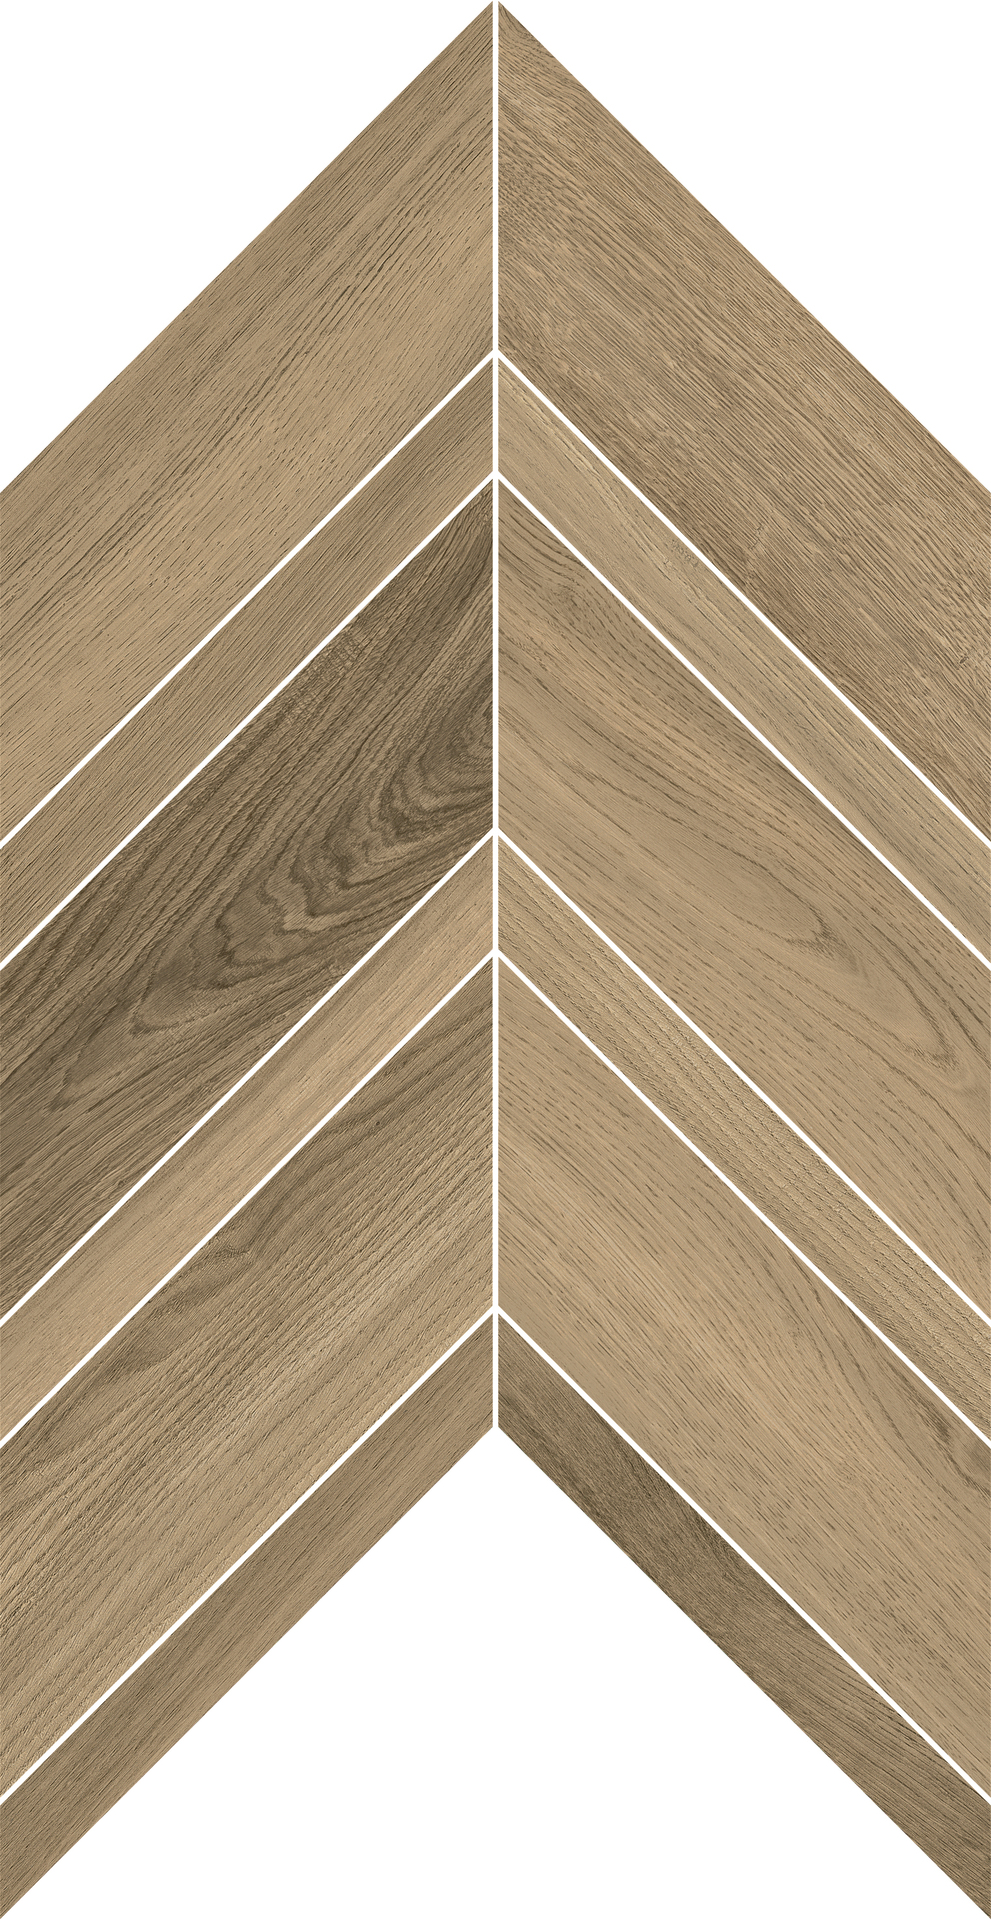 Panaria Nuance Cendre Antibacterial - Naturale Chevron PGZN111 37,4x48,6cm rectified 9,5mm